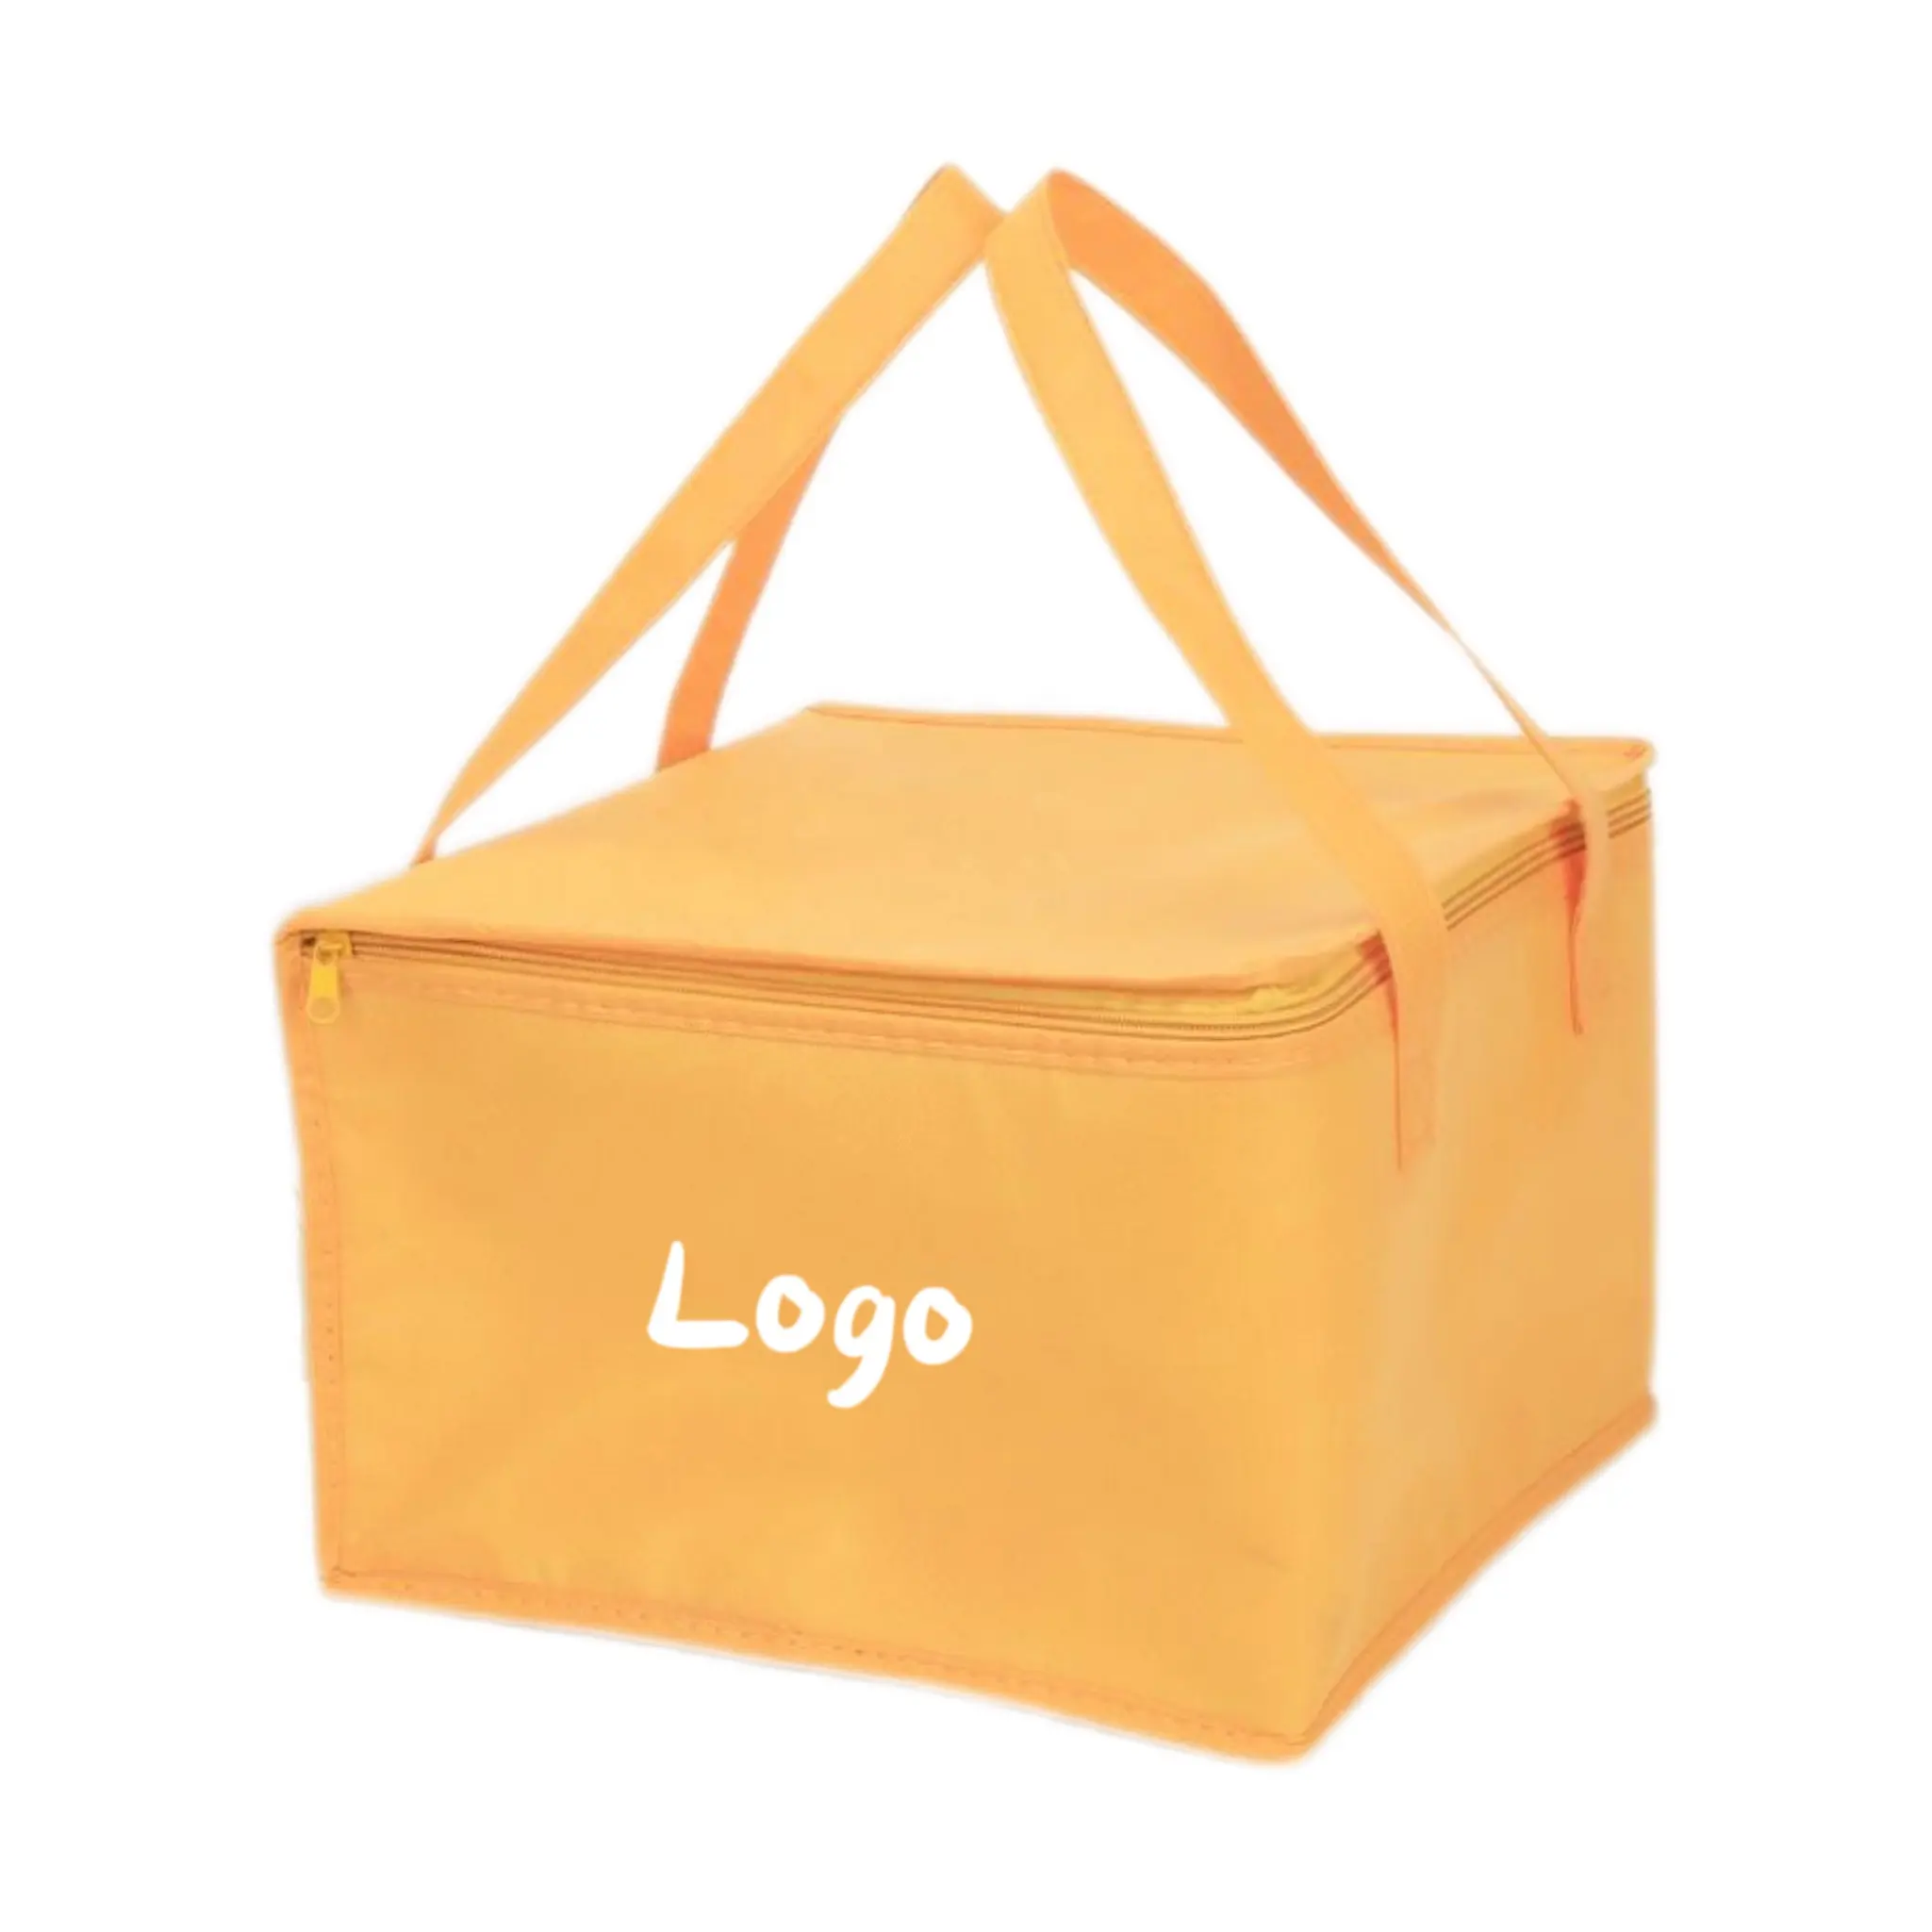 Insulated Thermal Lunch Cooler Bag New Eco Friendly Waterproof Portable Food Delivery Black Aluminum Foil Customized Logo 100pcs